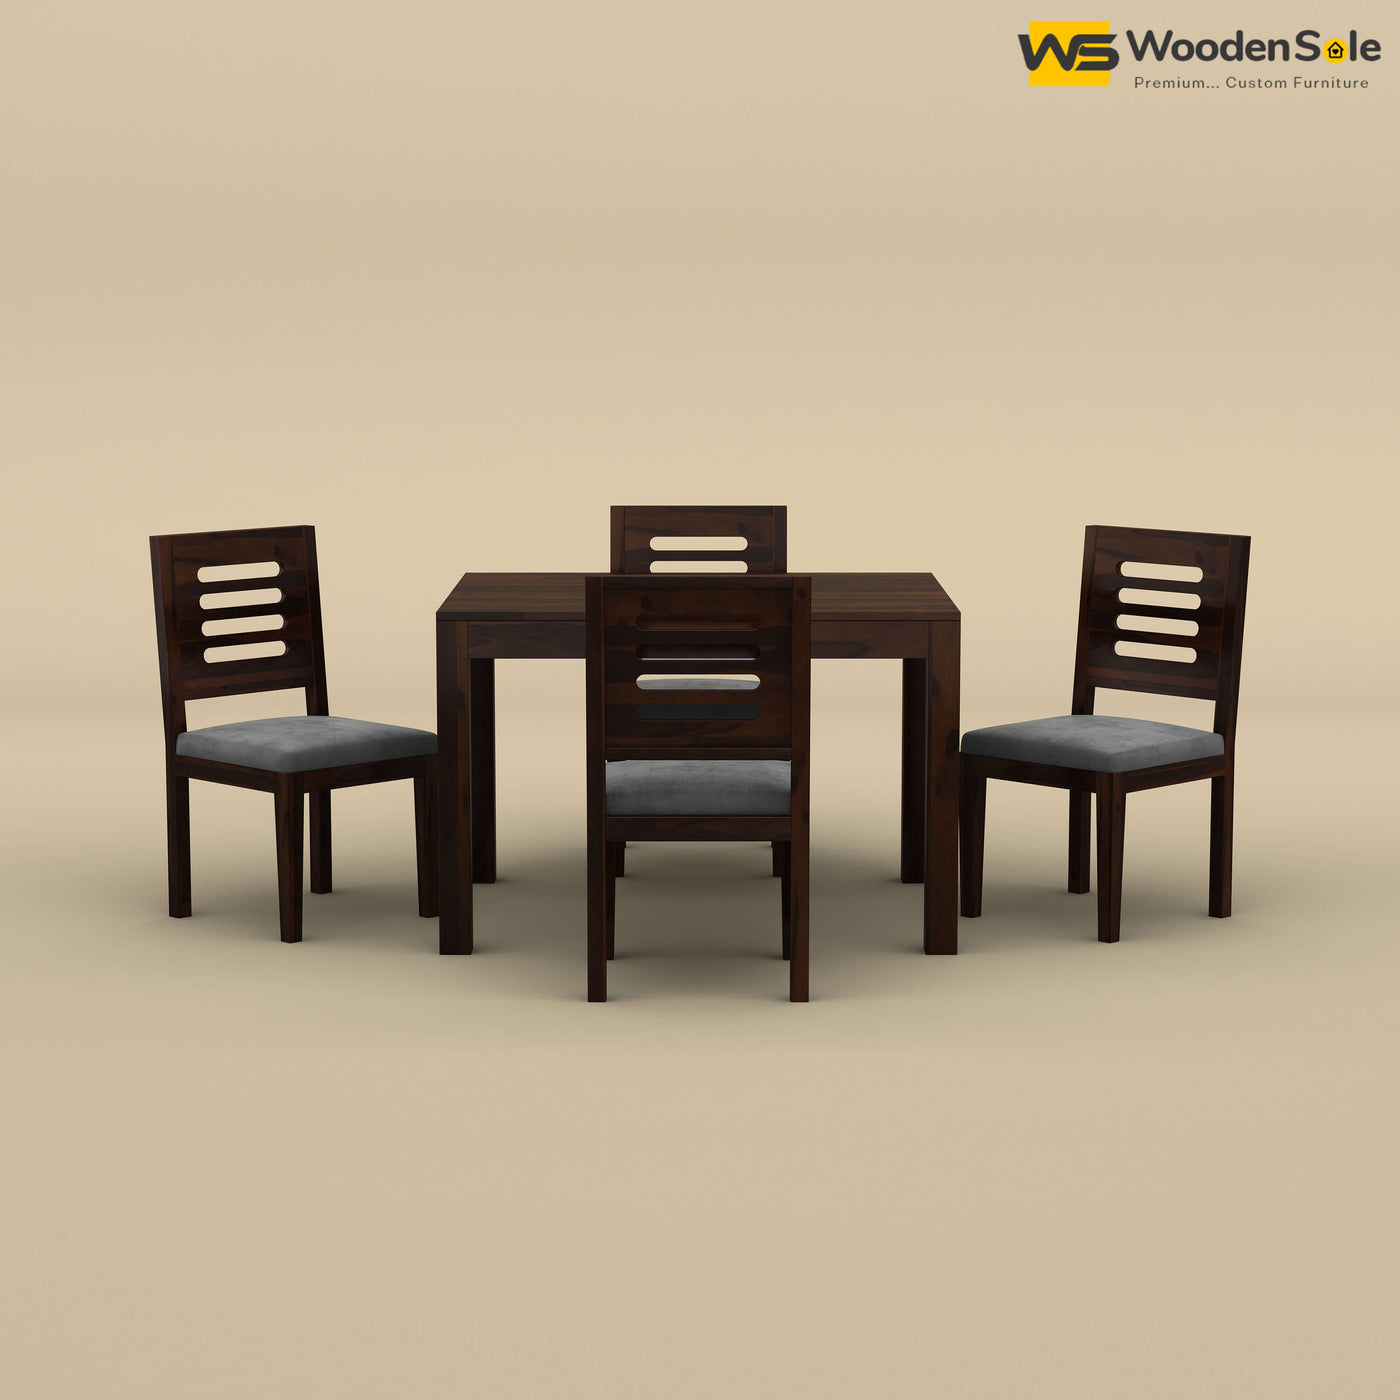 Sheesham Wood 4 Seater Dining Set with Upholstery Chair (Walnut Finish)